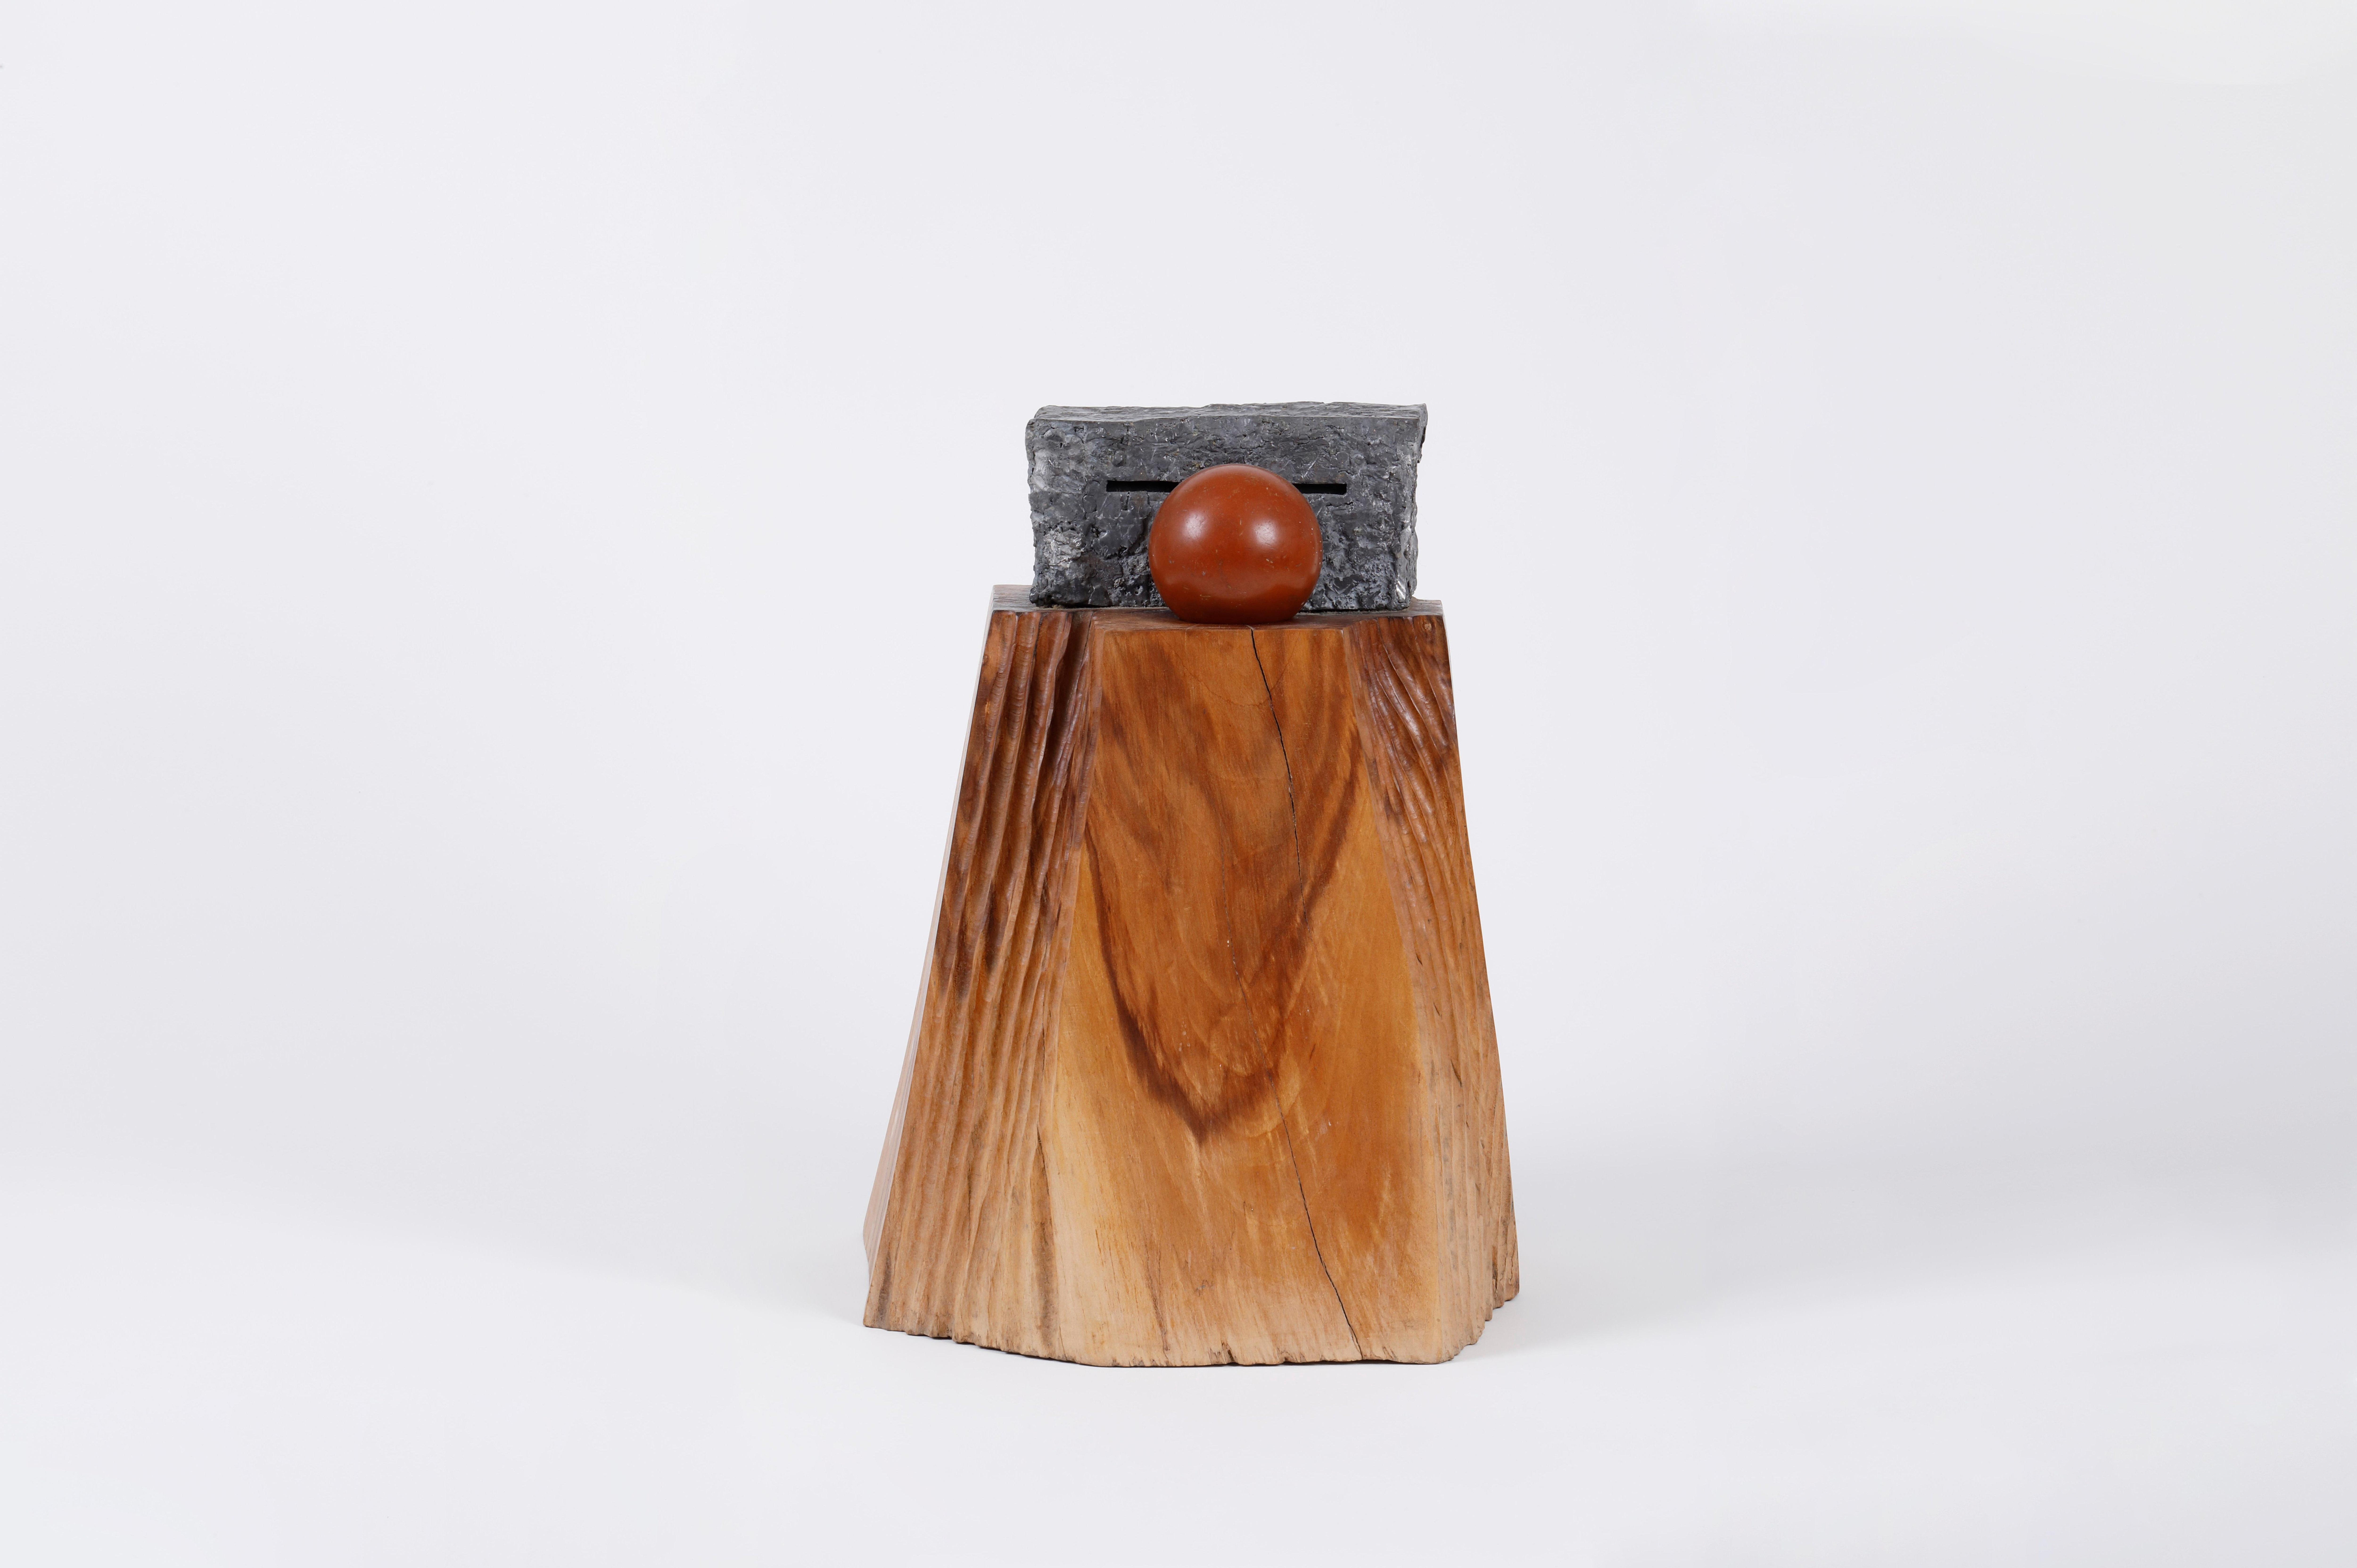 Unusual brutalist hand-carved wooden sculpture, France
American walnut, lead-cover and sphere